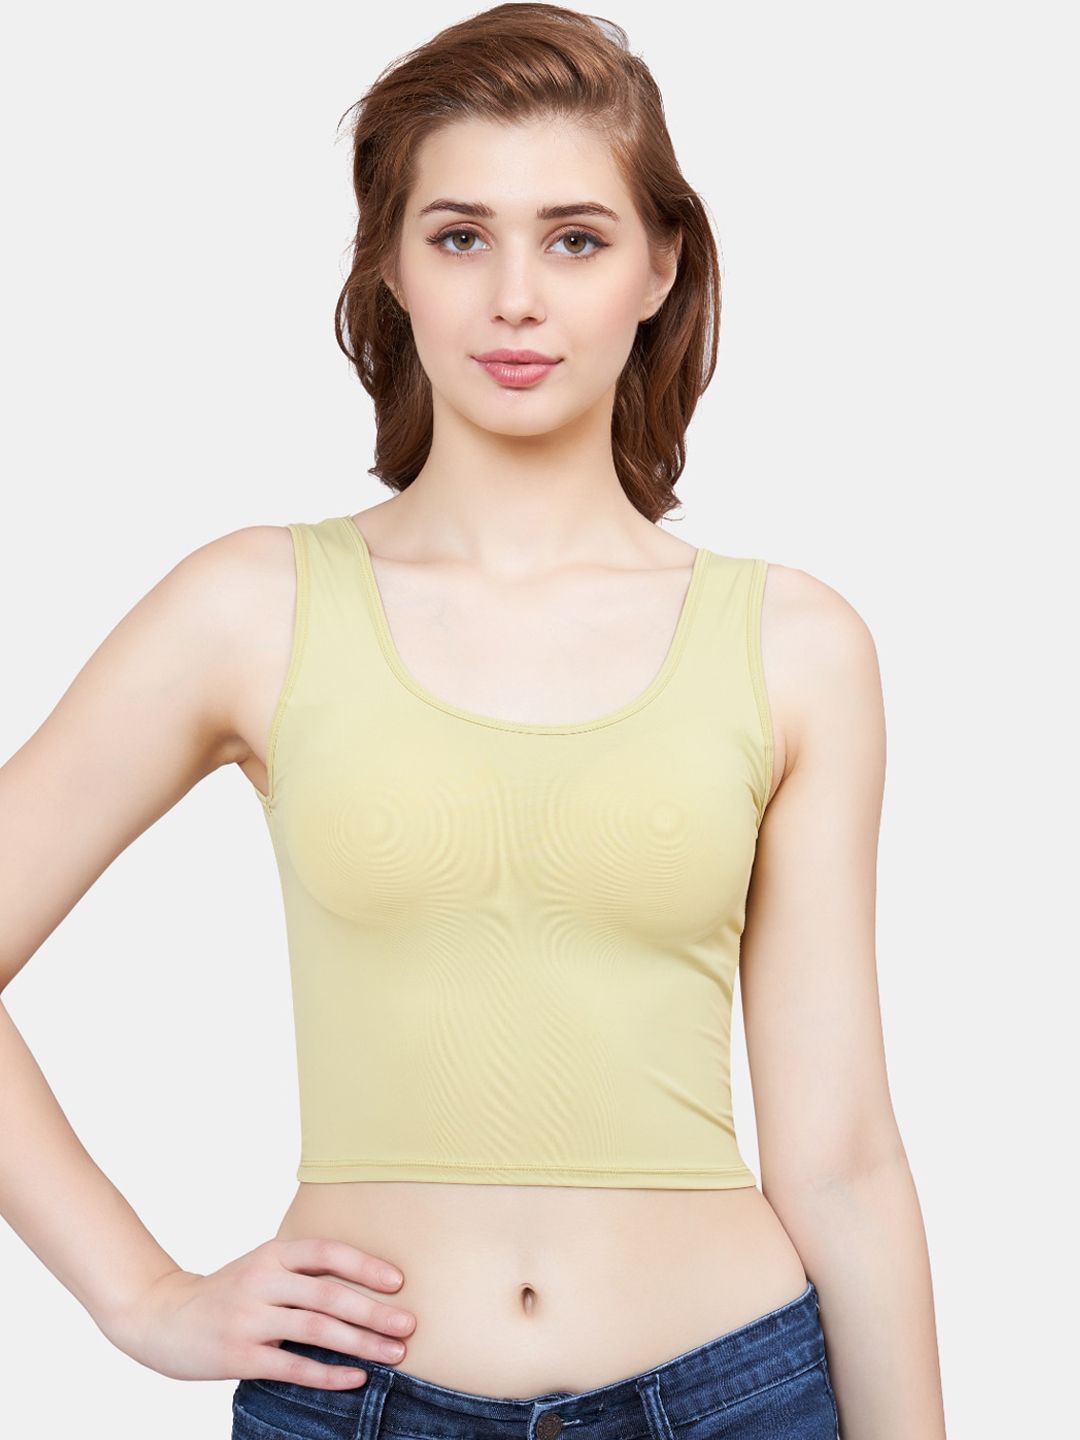 Buy Cropped Tank Top Online In India